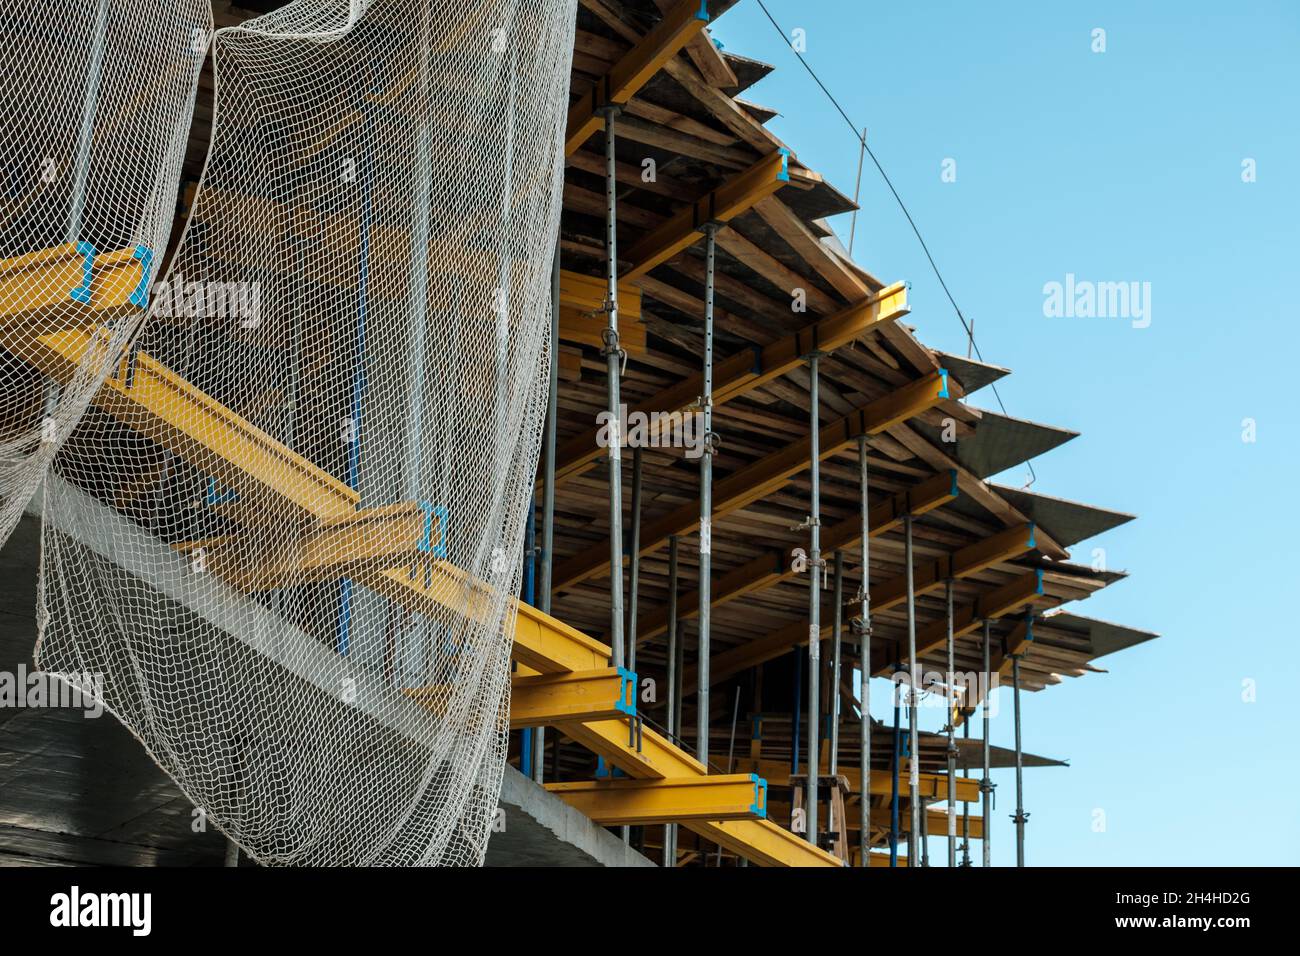 Protective building network used on building. Falsework used on skyscraper building. Stock Photo